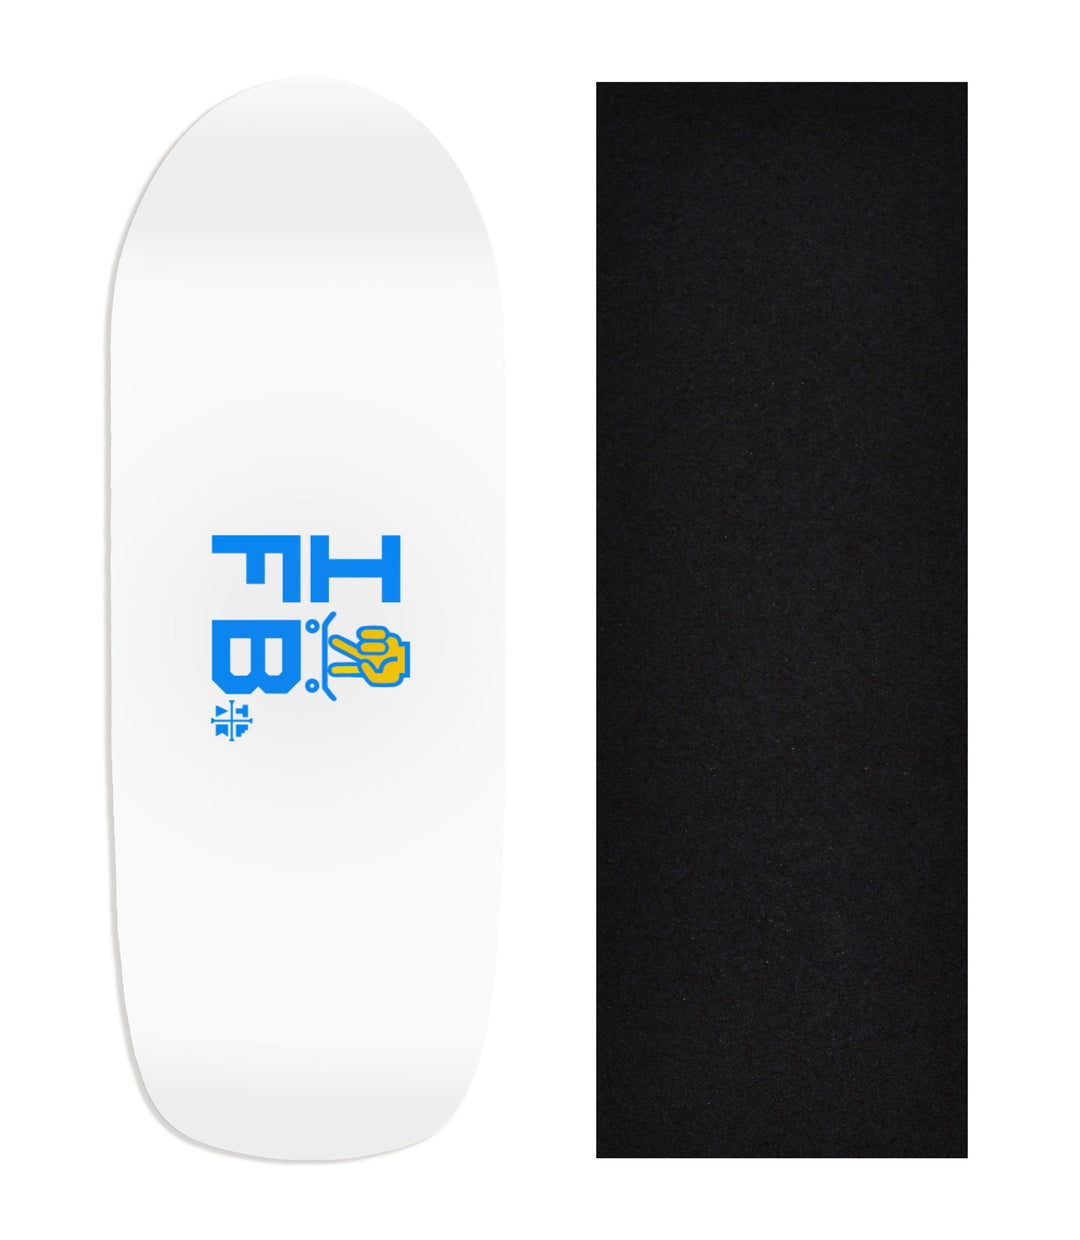 Teak Tuning Heat Transfer Graphic Wooden Fingerboard Deck, "I [SKATE] FB" (White) Poolparty Deck